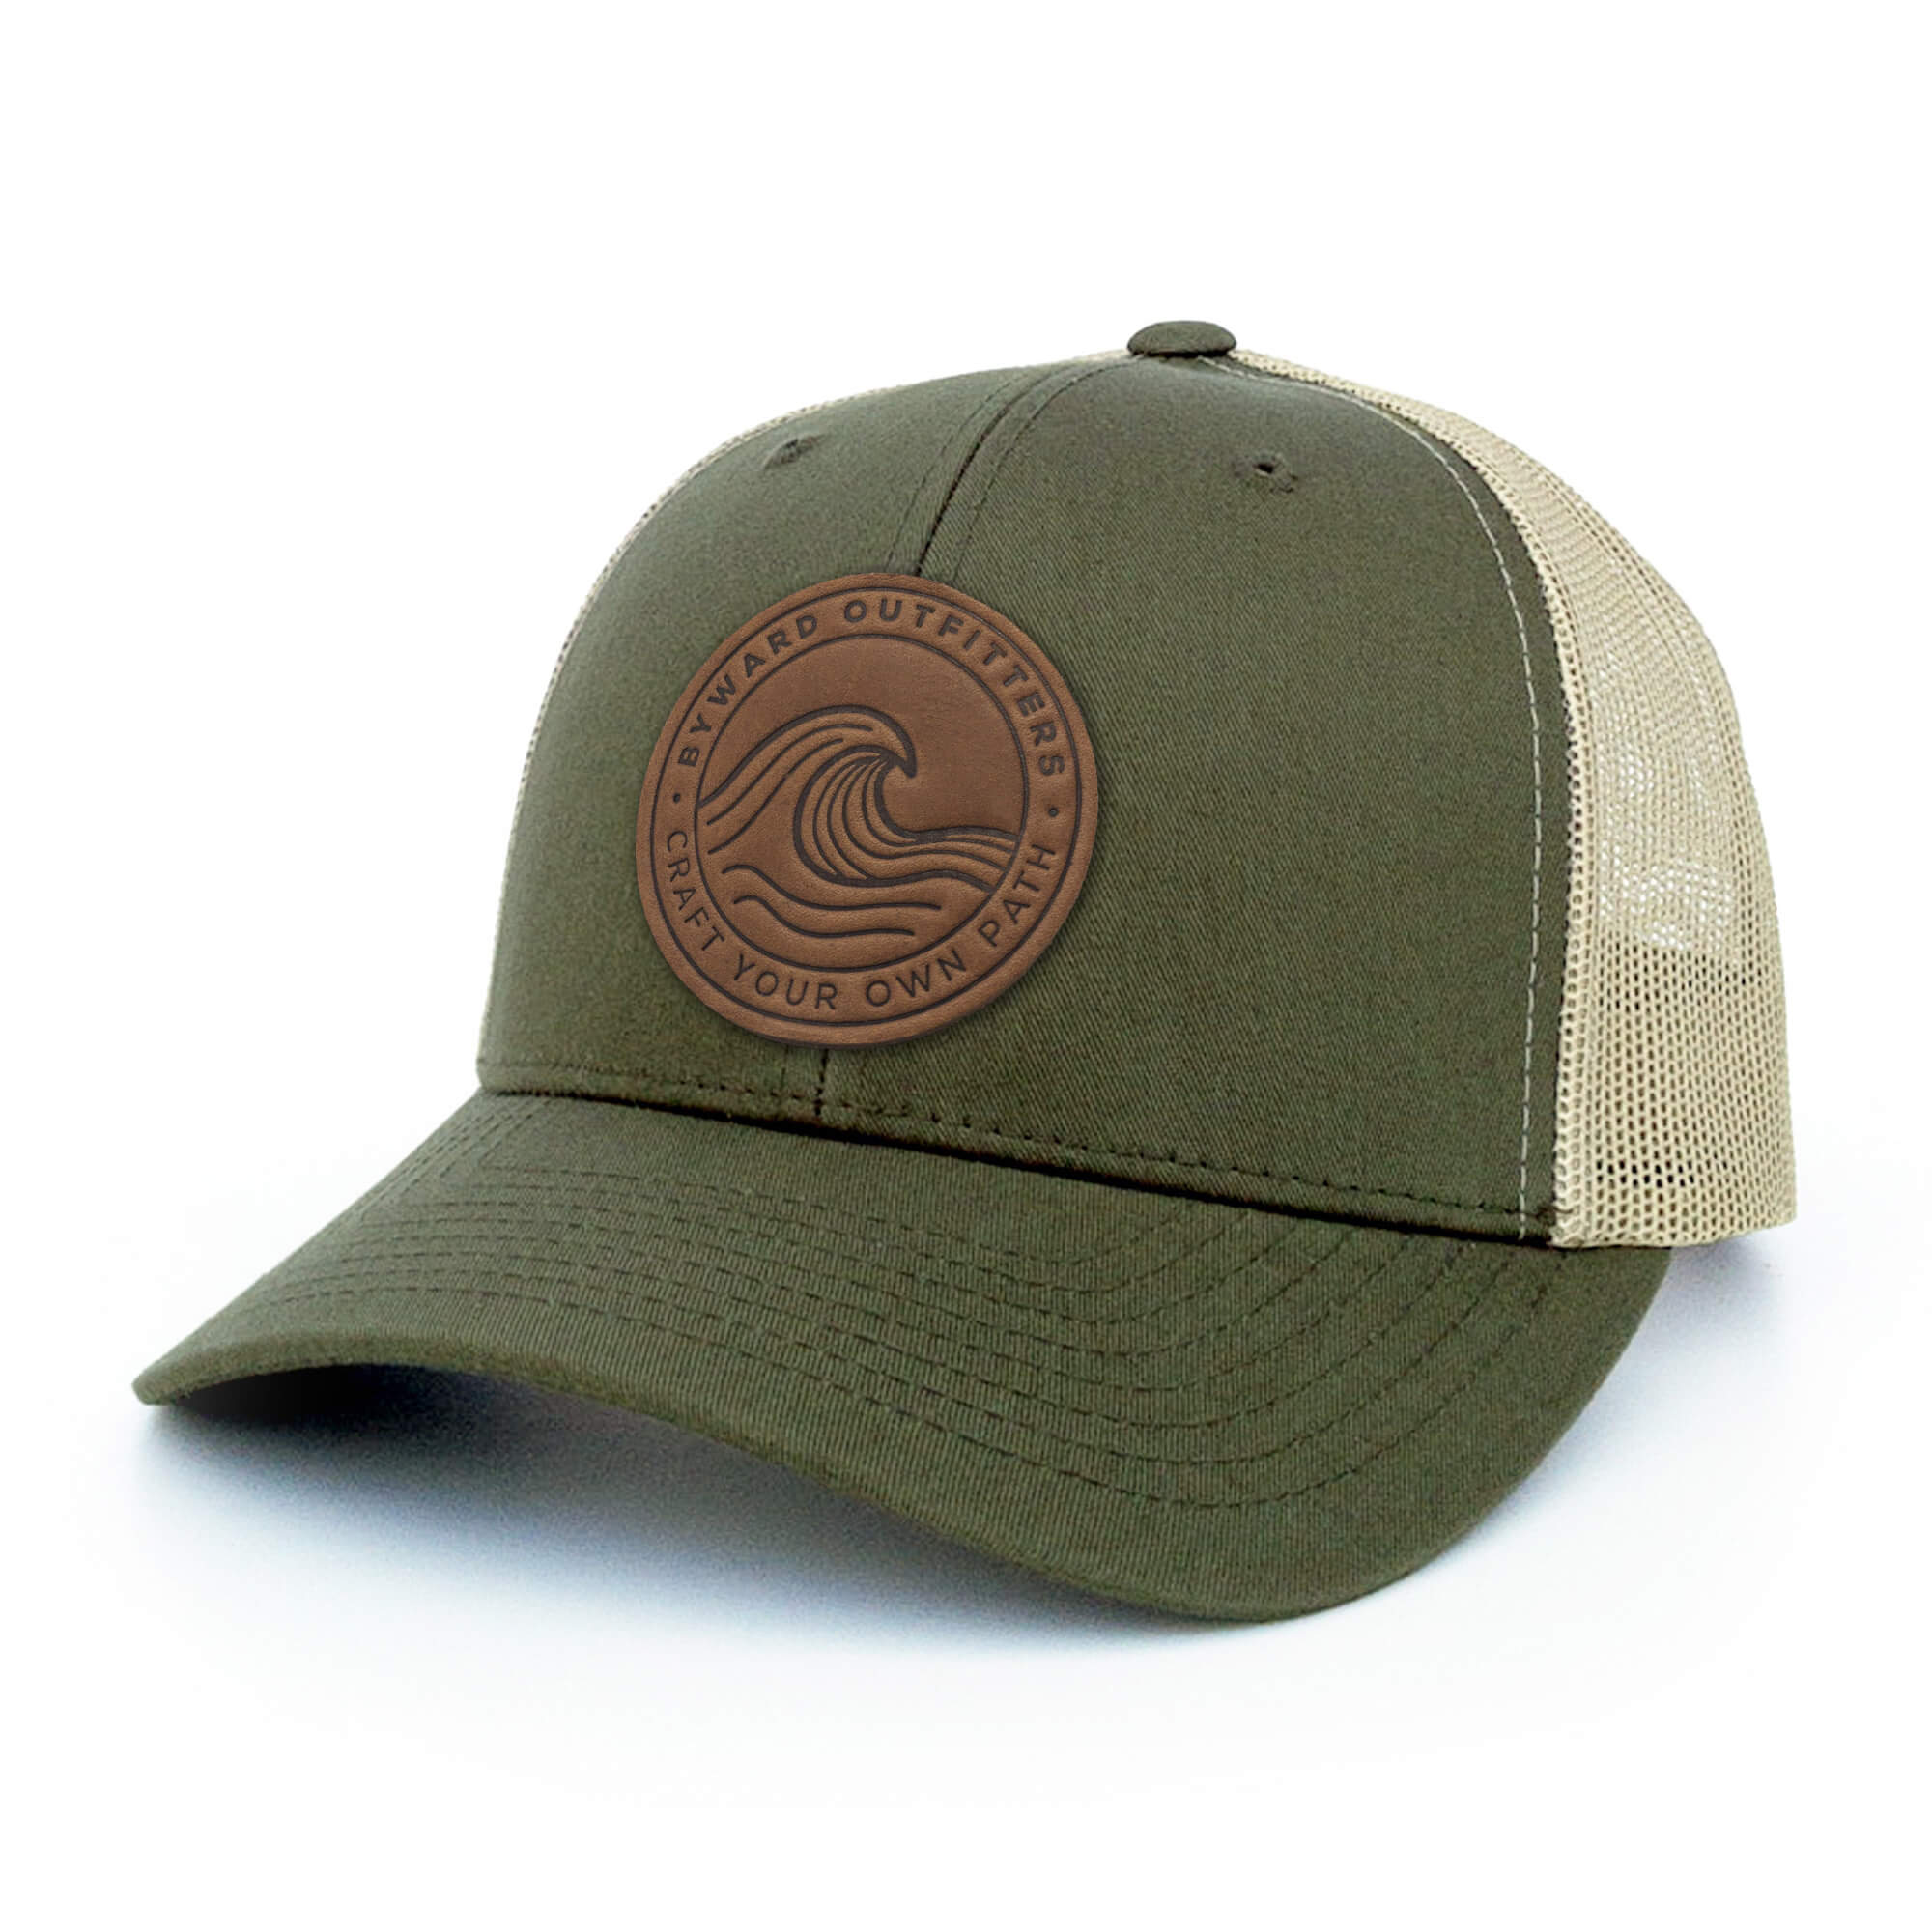 Moss Green and khaki trucker hat with full-grain leather patch of a Rolling Wave | BLACK-005-003, CHARC-005-003, NAVY-005-003, HGREY-005-003, MOSS-005-003, BROWN-005-003